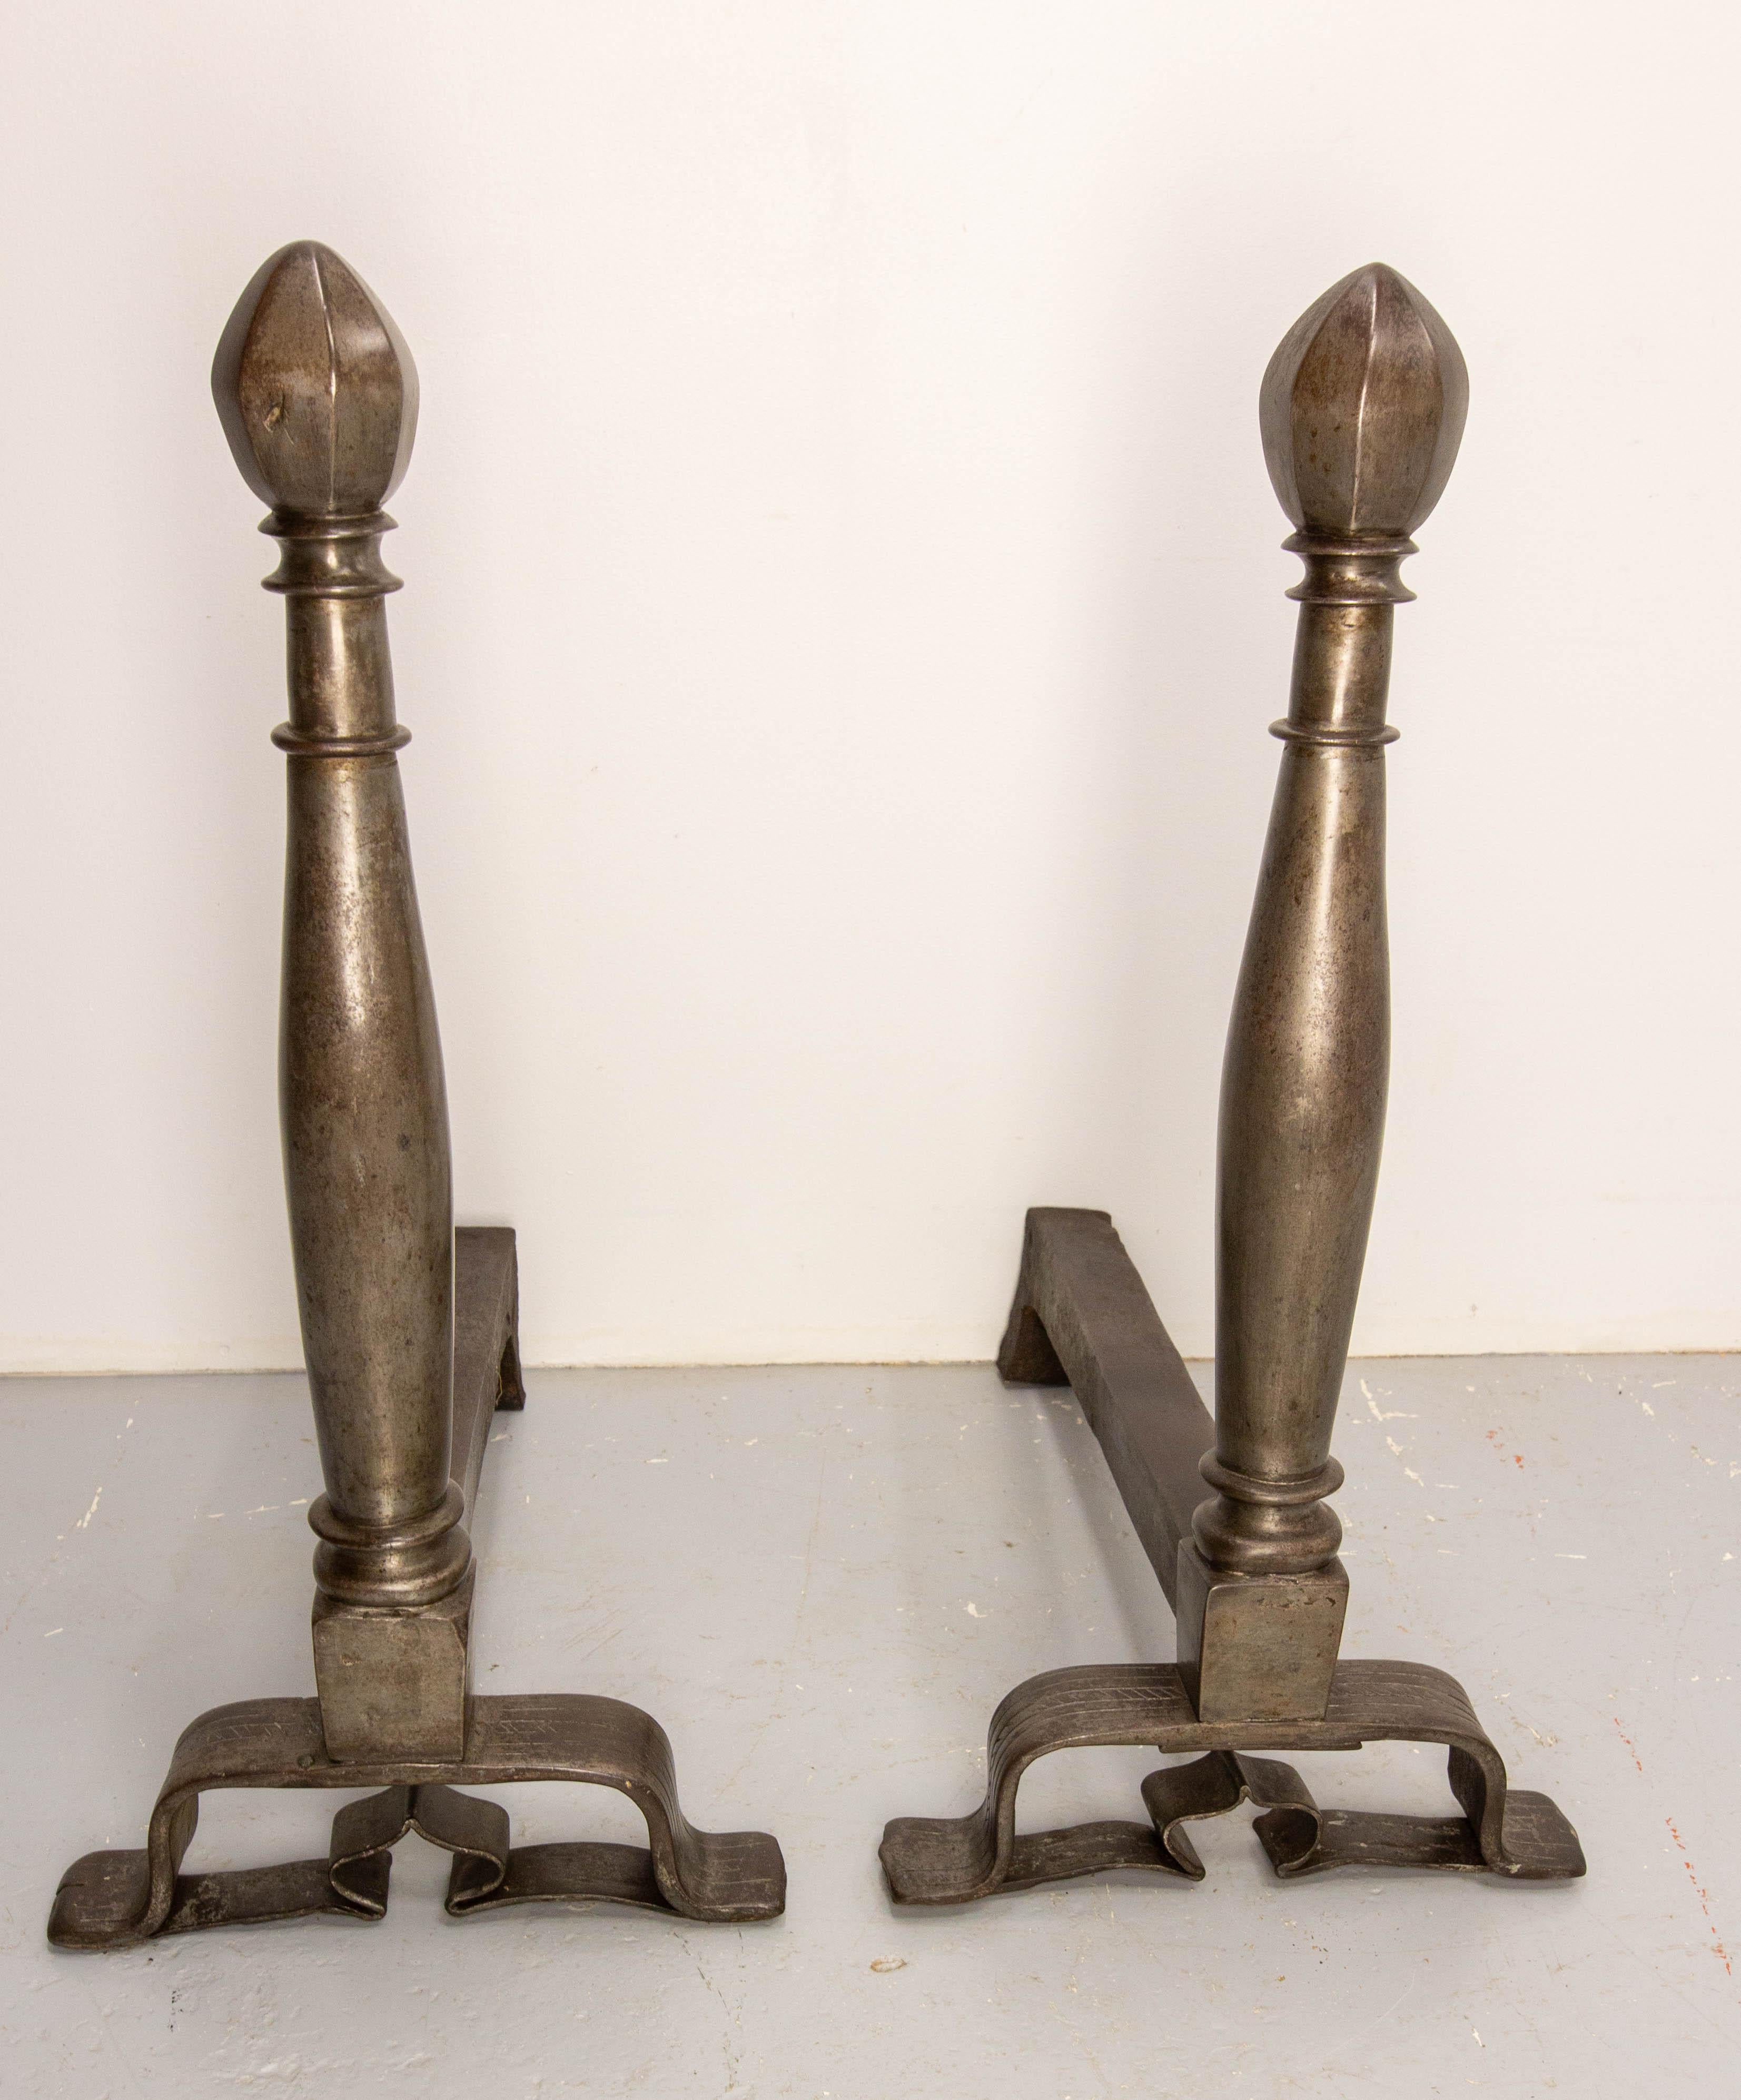 Pair of andirons made in the 19th century for a huge fireplace, probably for a castle or a large bourgeois house.
Wrought iron firedogs
France.
Good condition

Shipping:
65 / 40 / 83 cm 79 kg.